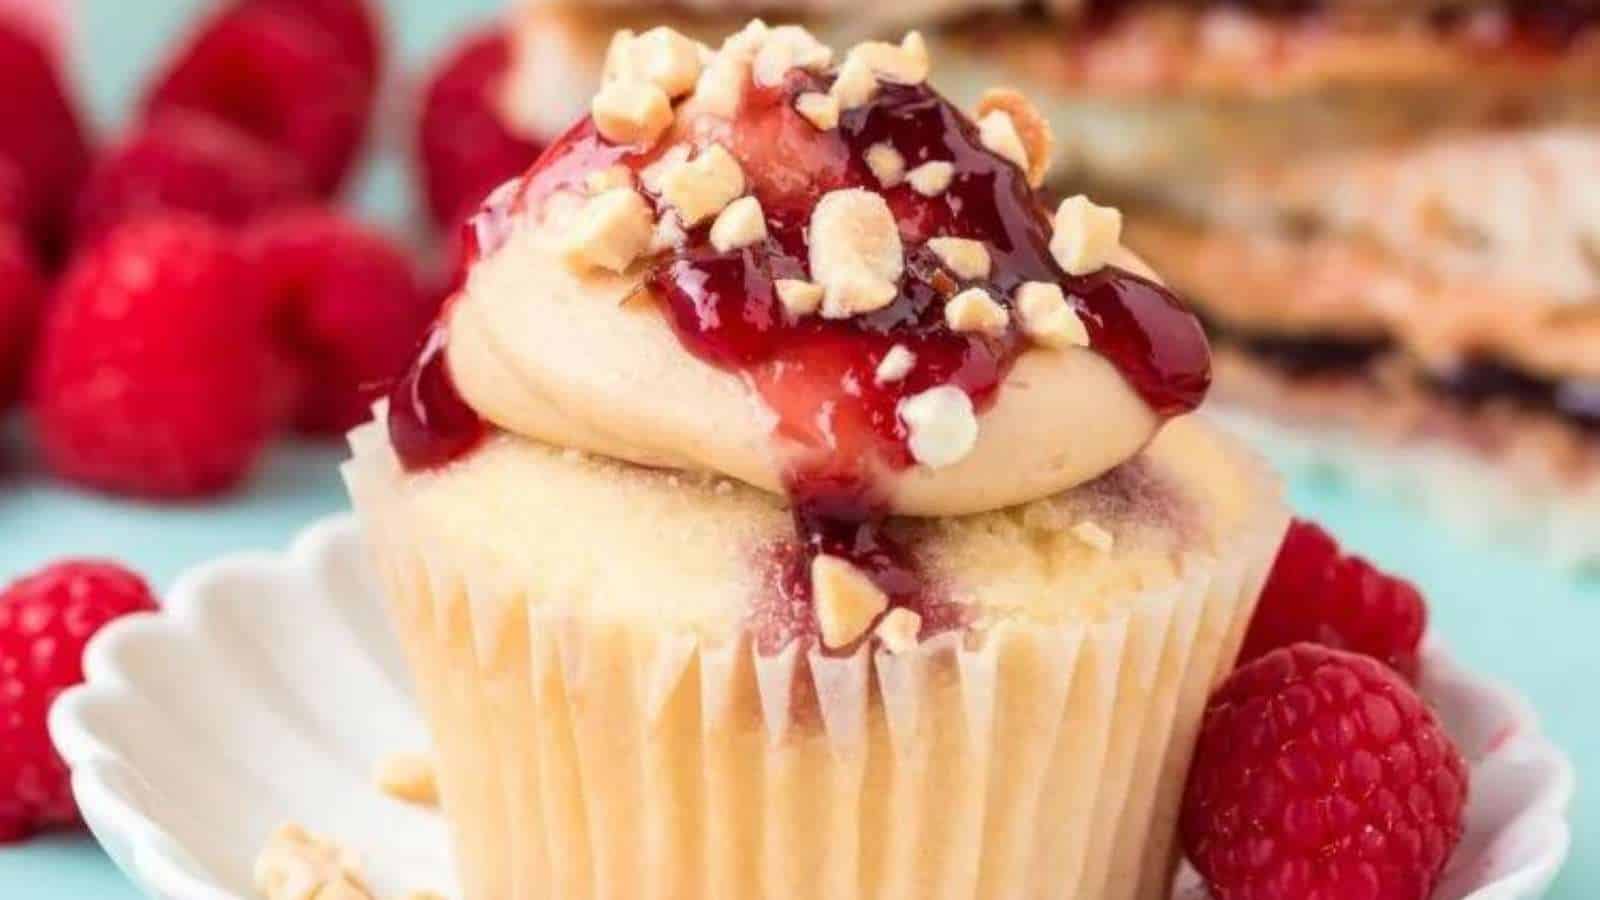 A cupcake with raspberries and nuts on top.